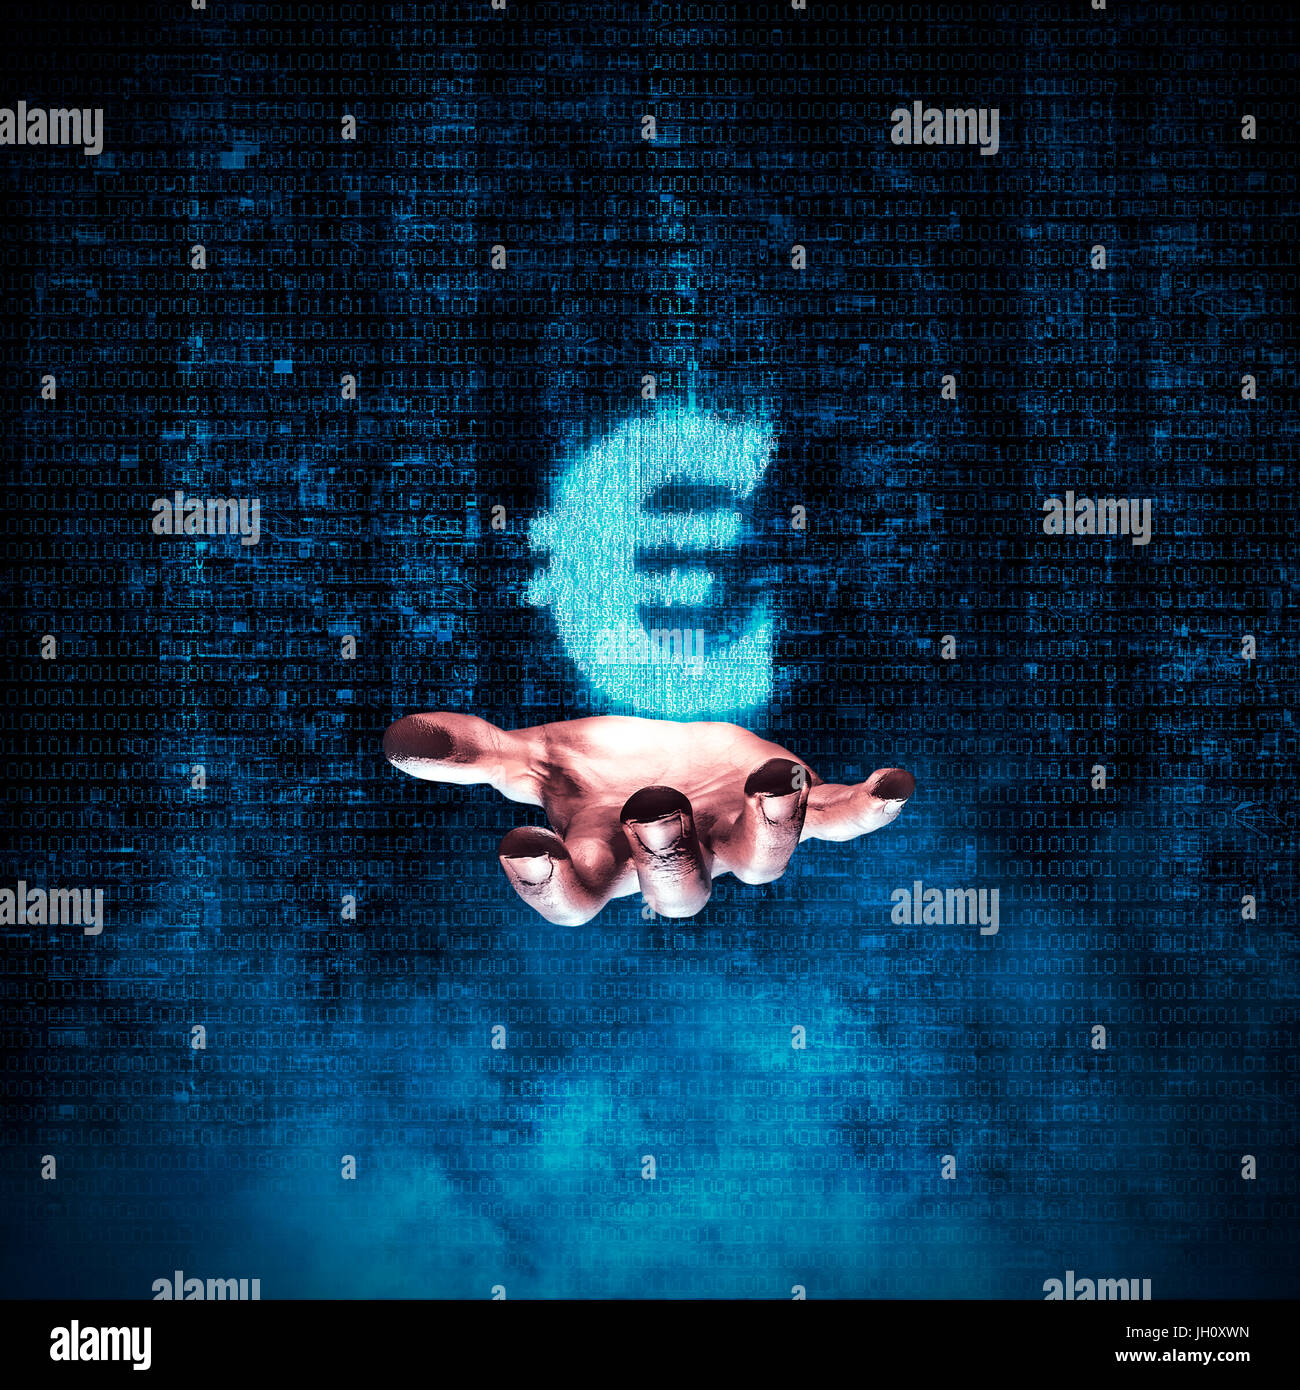 Binary euro hand / 3D illustration of glowing euro symbol formed by binary digits floating above open hand Stock Photo